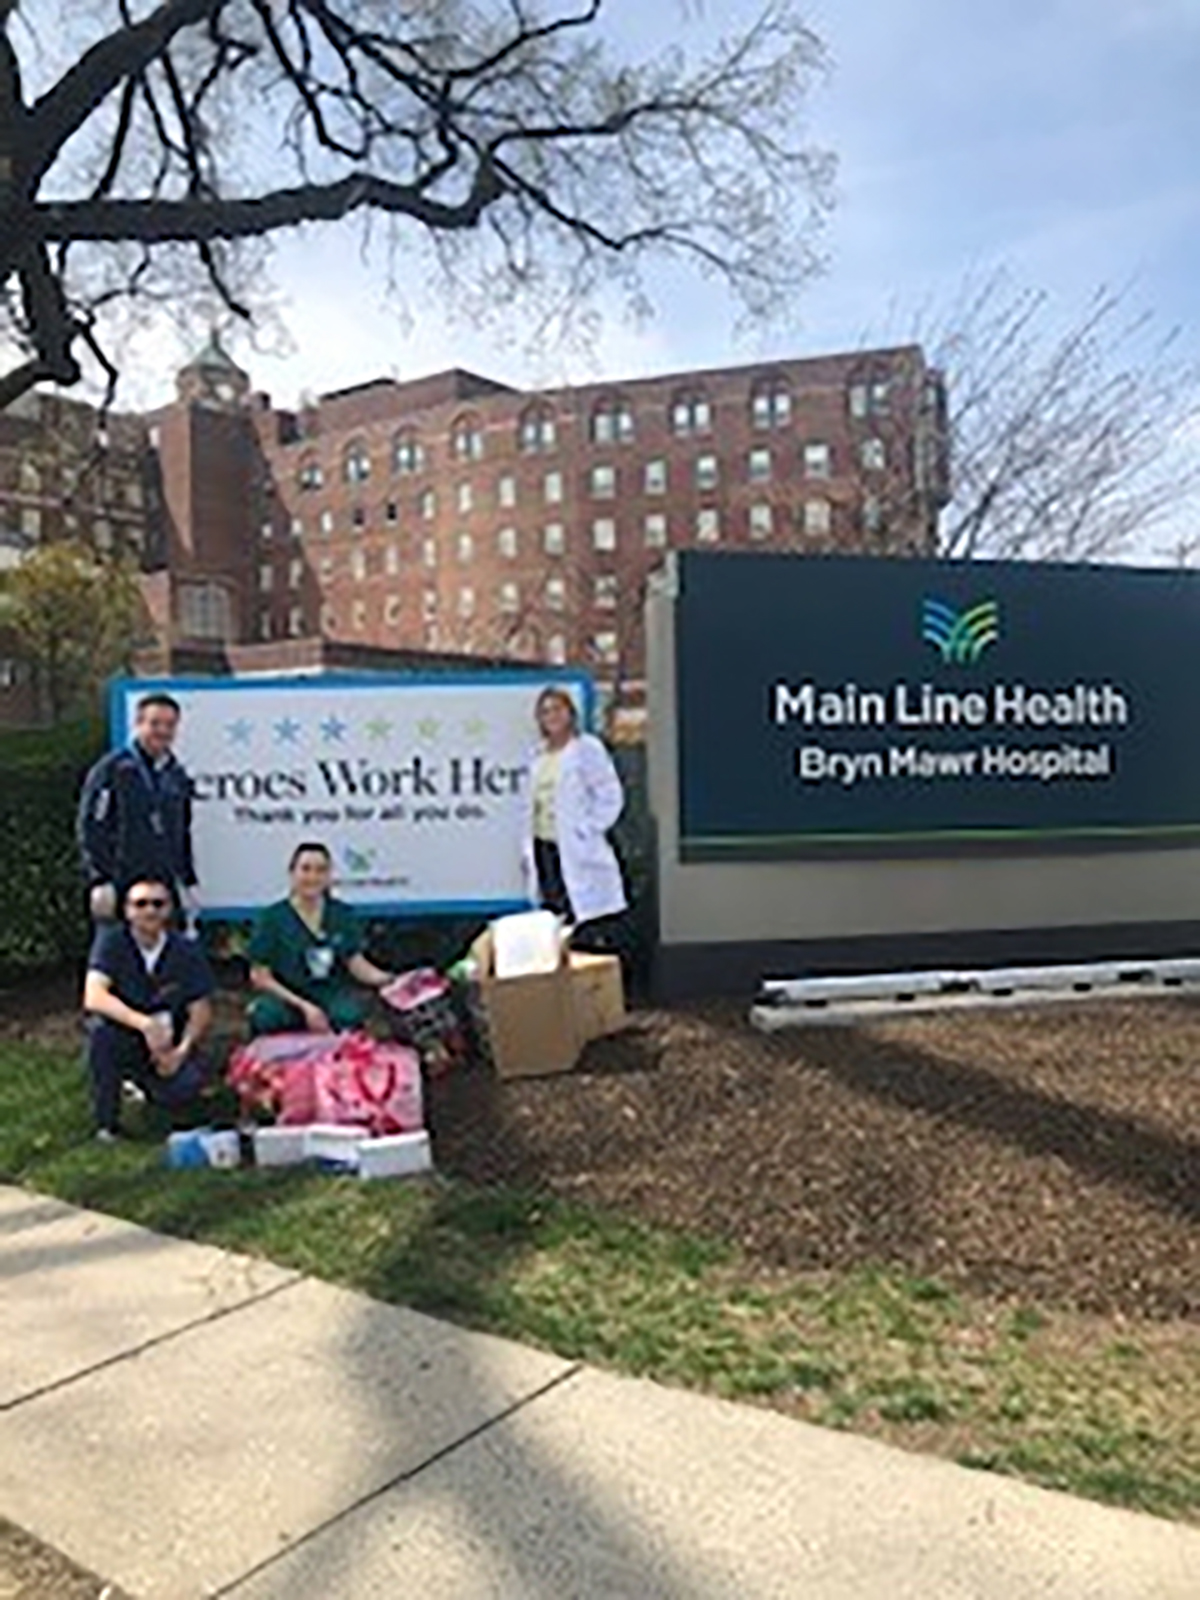 Personal protective equipment donation to Bryn Mawr Hospital